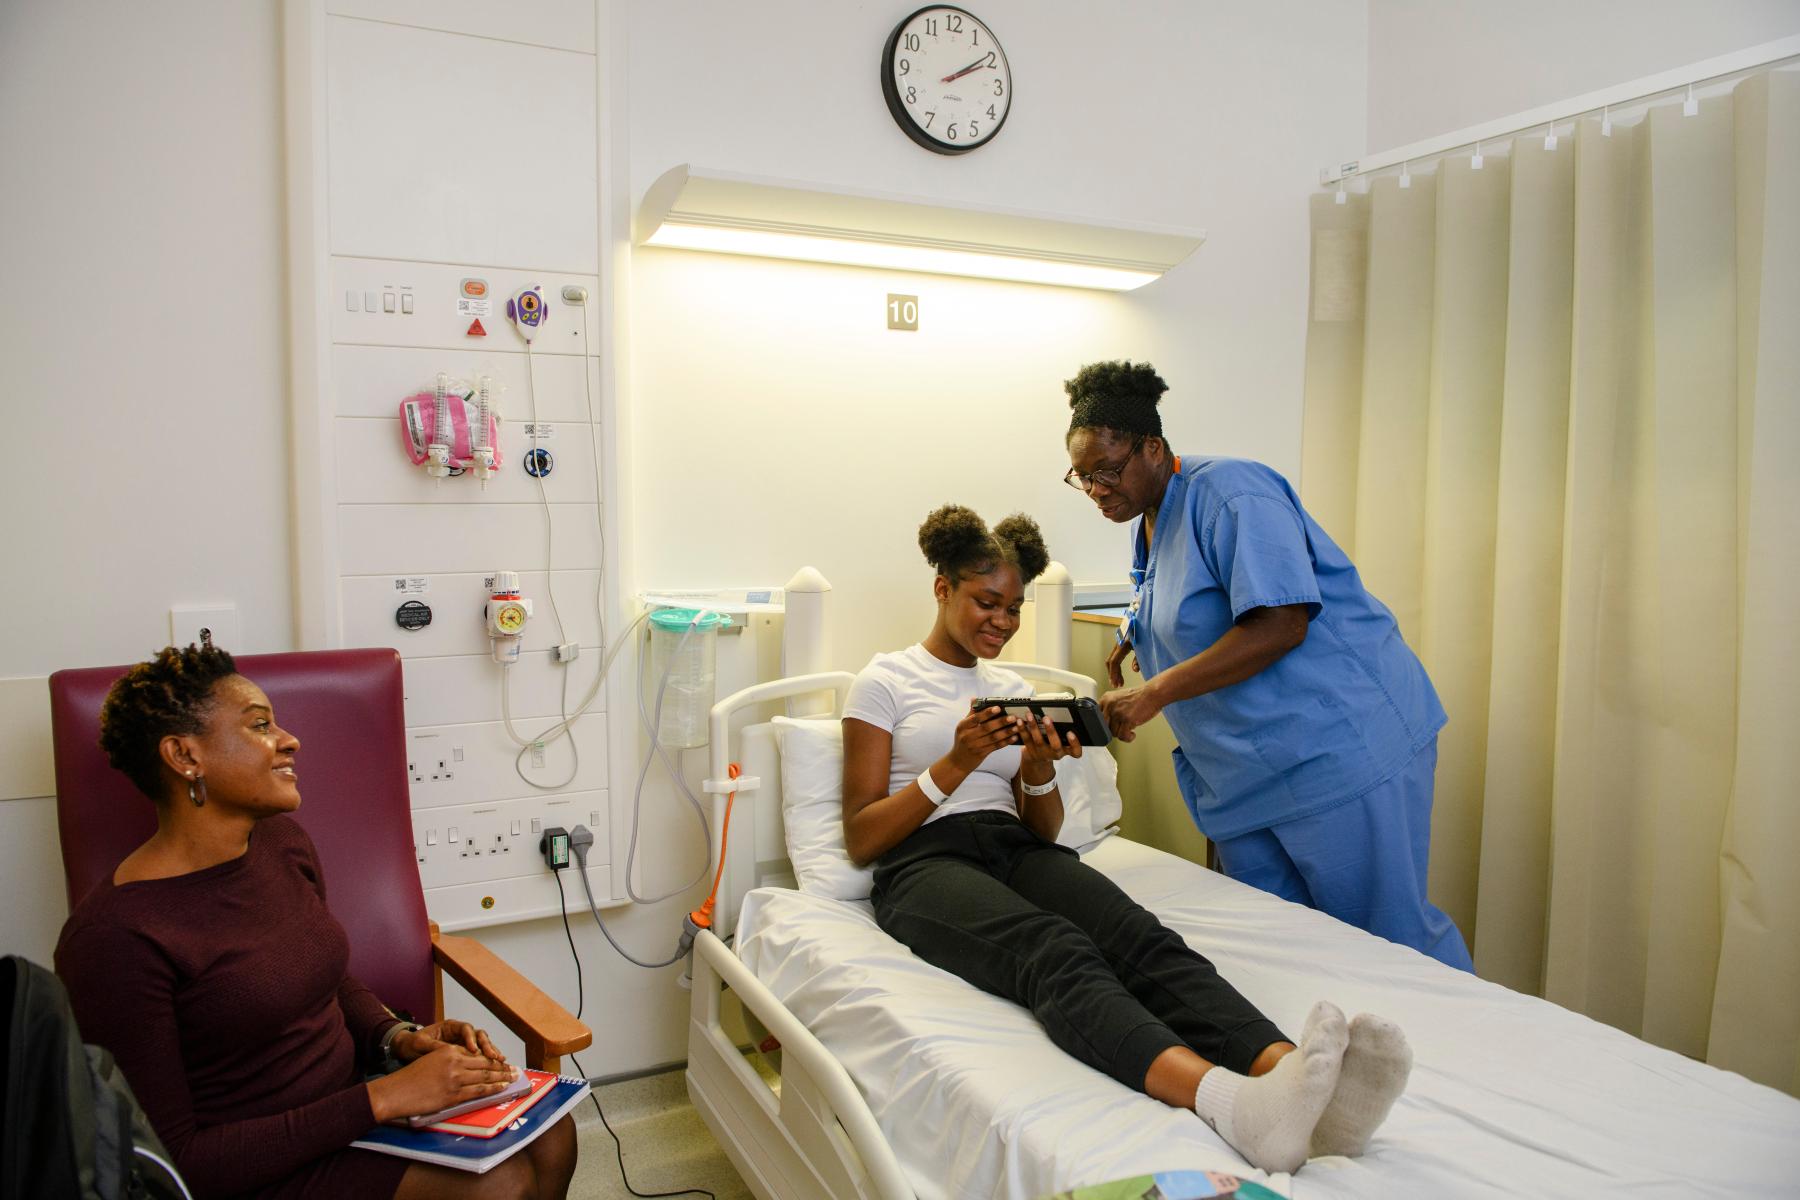 A healthcare professional speaks to a young patient as they sit in a hospital bed